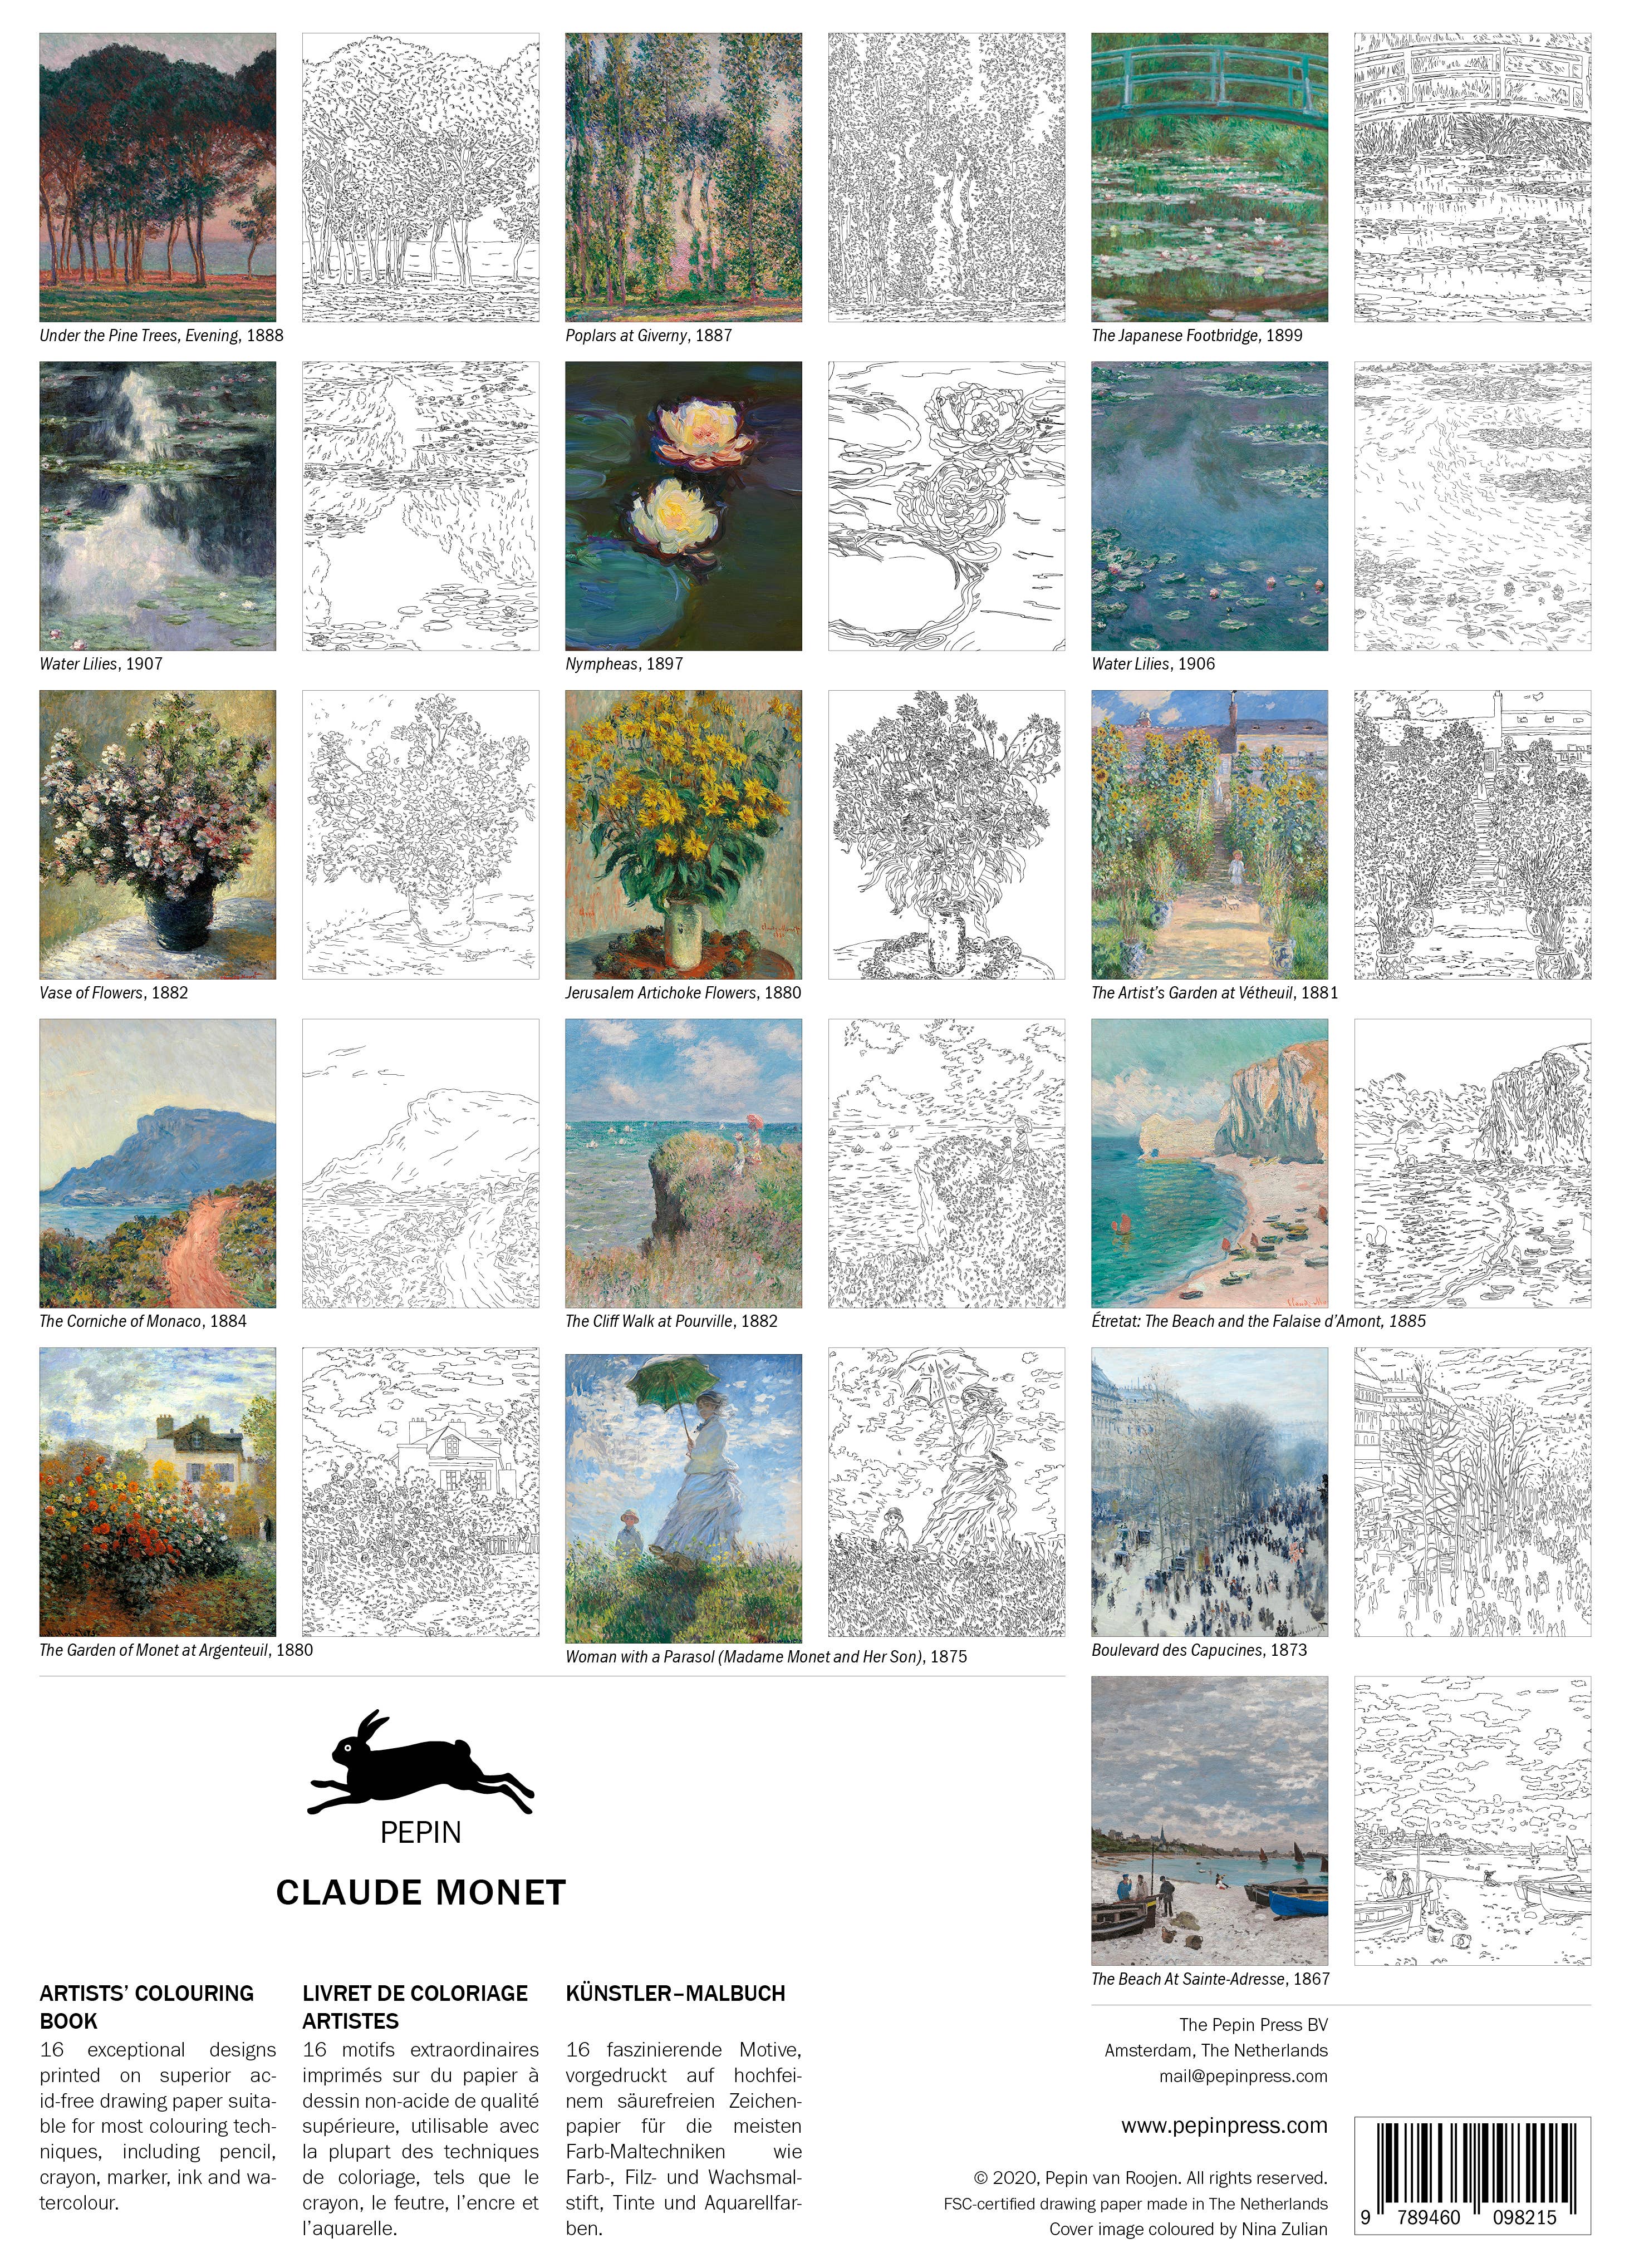 Monet's Palette: A Professional Colouring Journey Inspired by Claude Monet